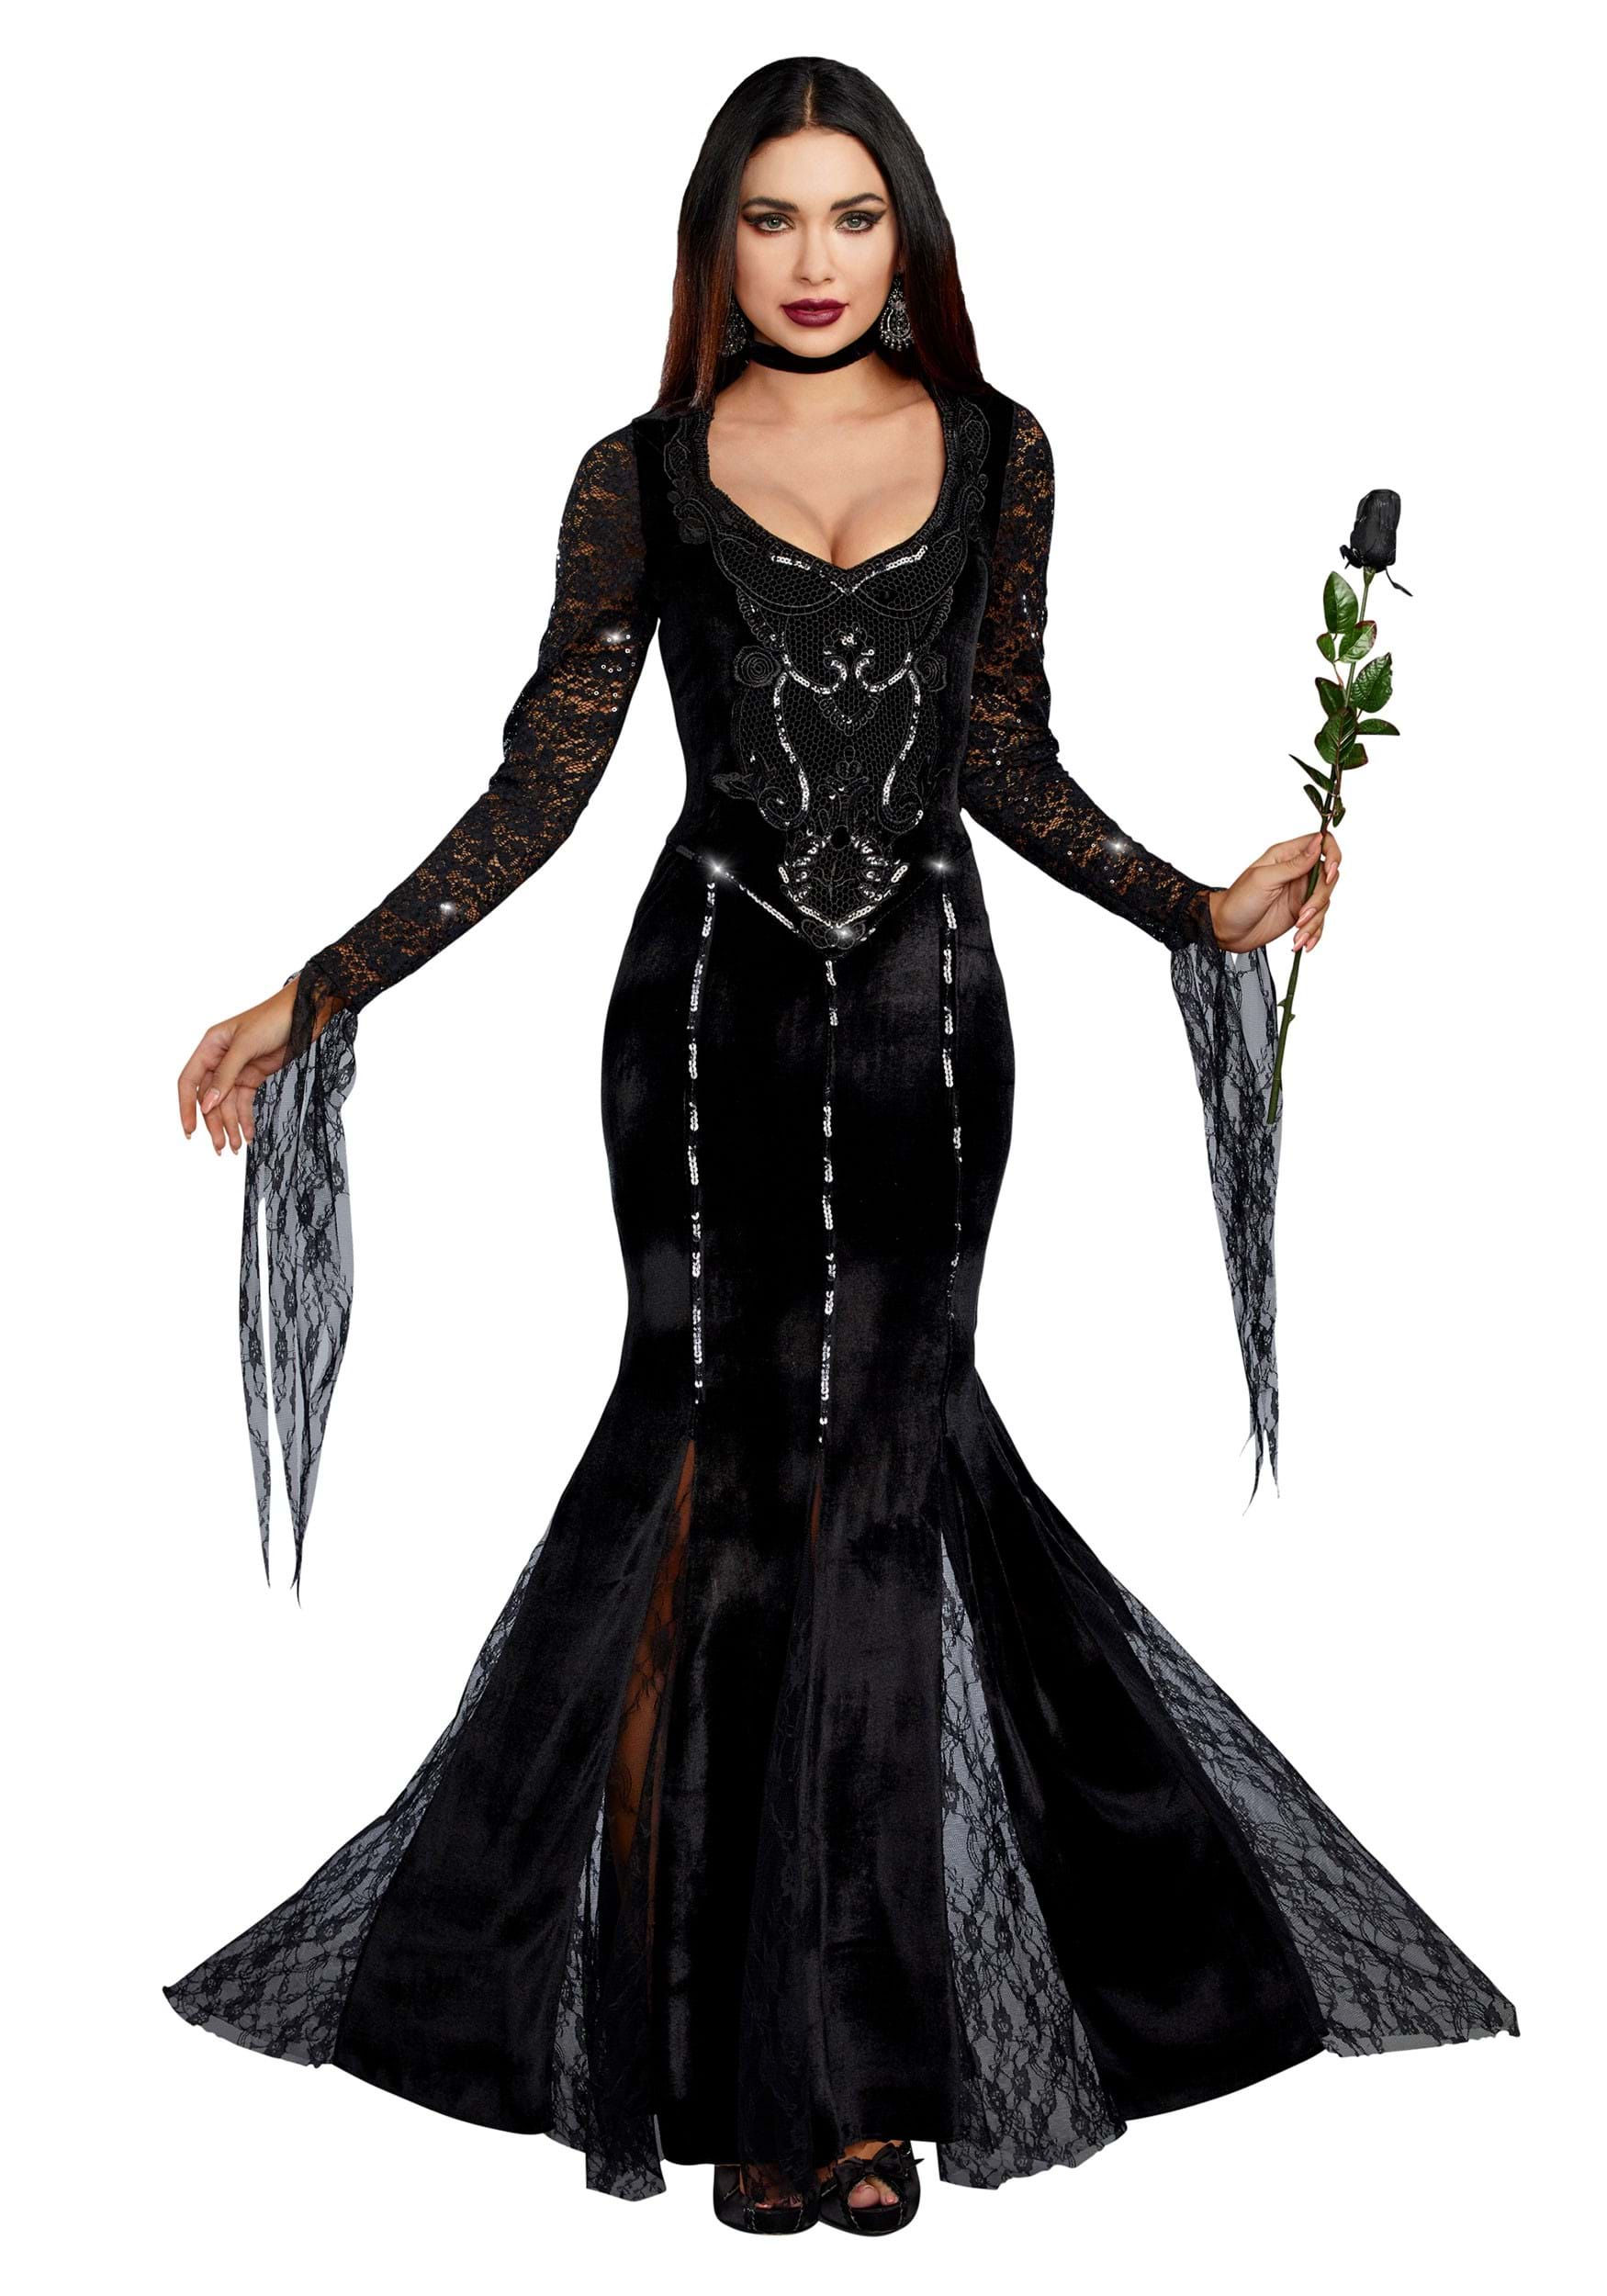 Photos - Fancy Dress Dreamgirl Mortuary Mama Costume for Women Black DR10639